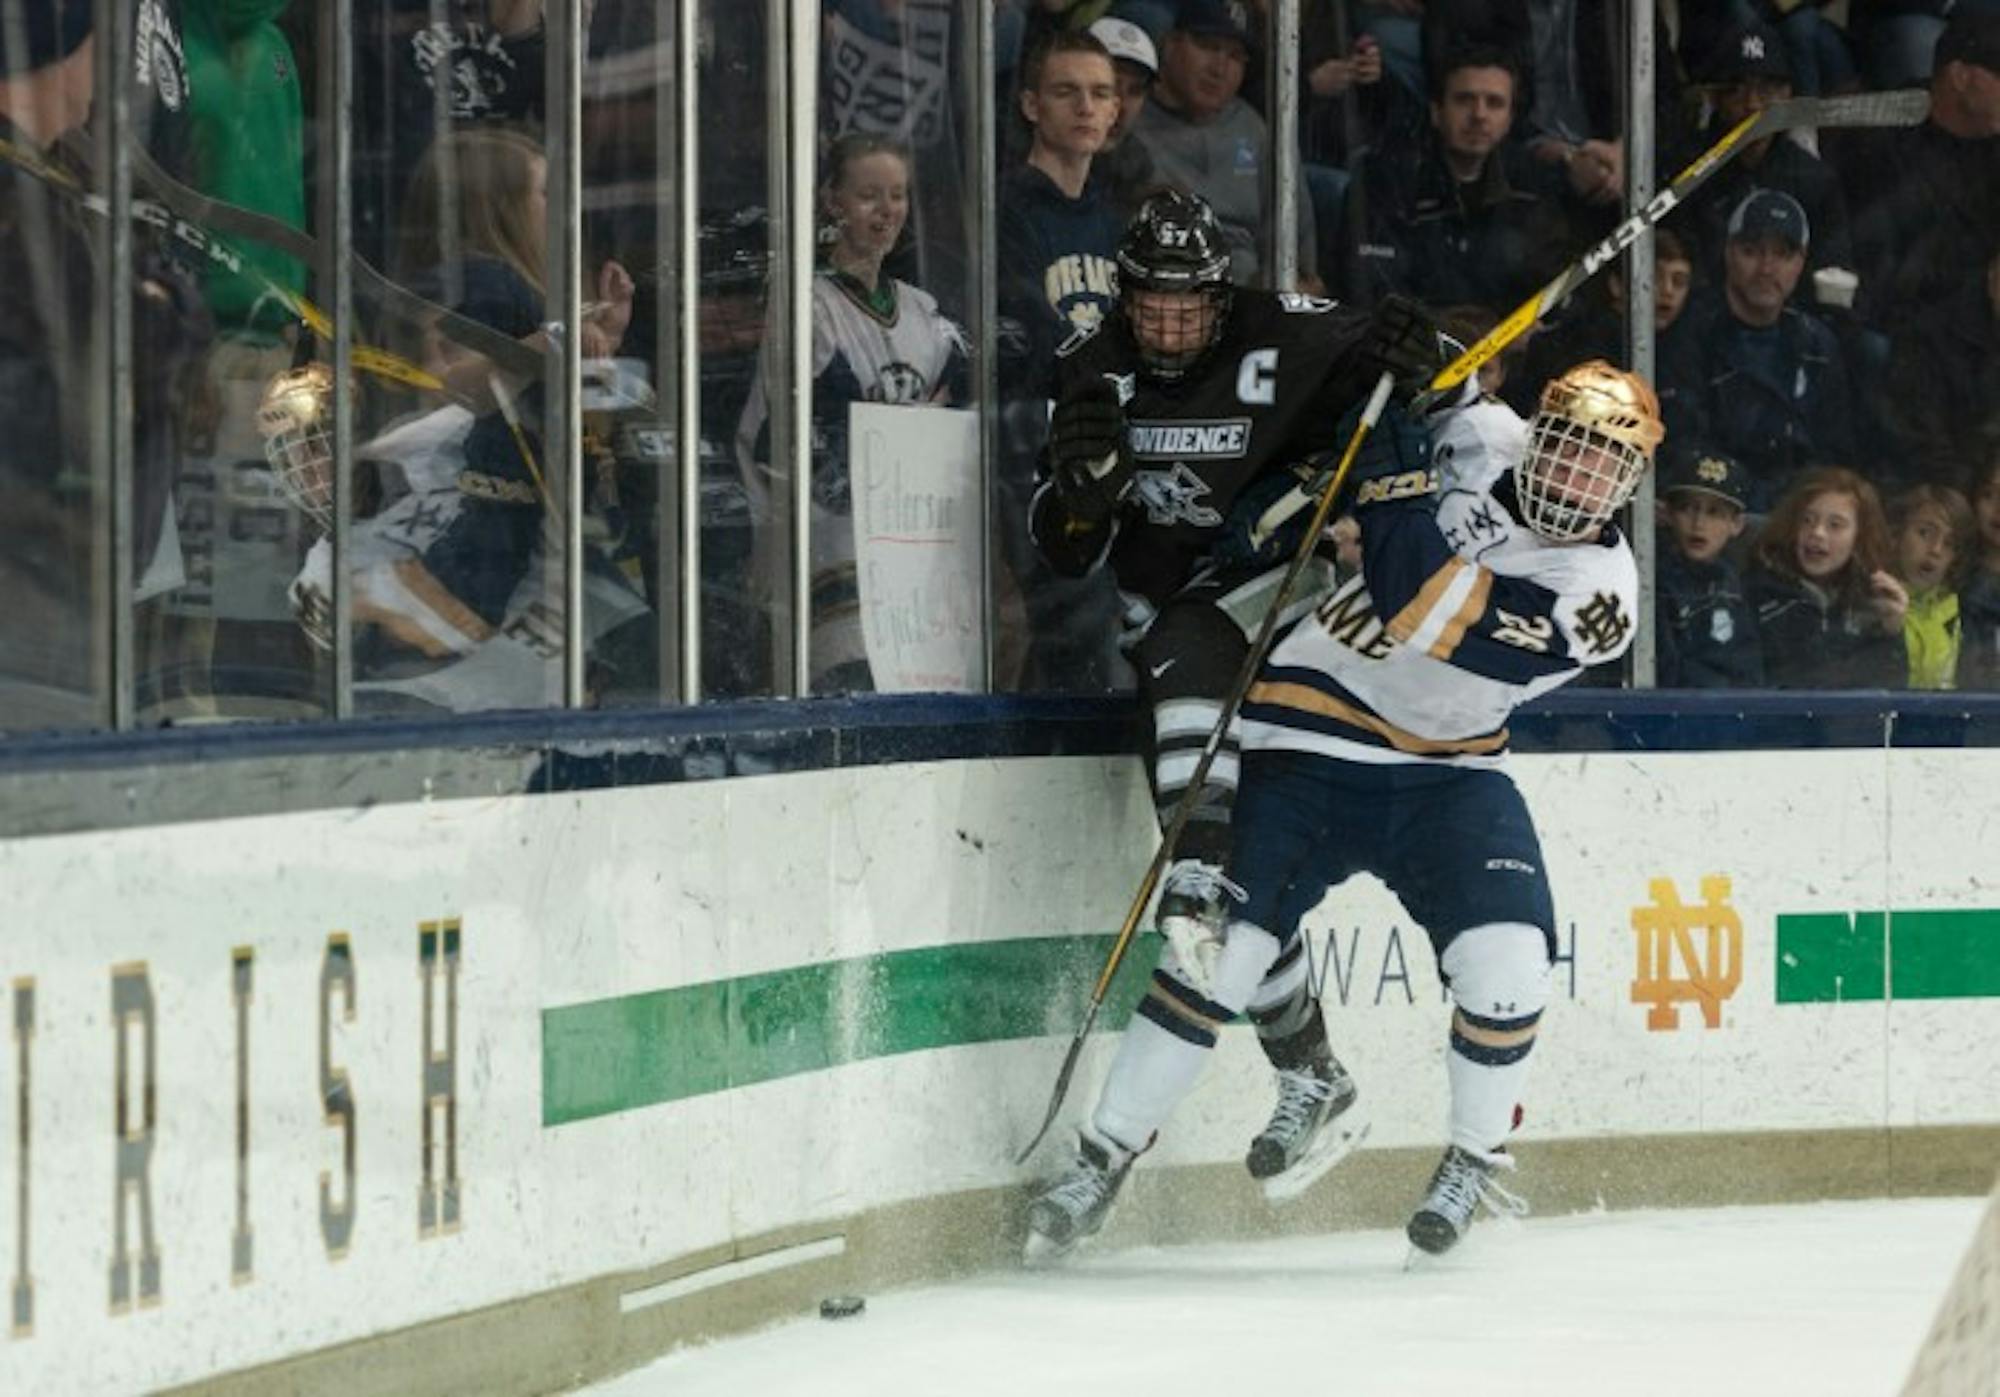 Irish freshman forward Cam Morrison fights for the puck during Notre Dame's 5-2 win over Providence on March 11 at Compton Family Ice Arena.